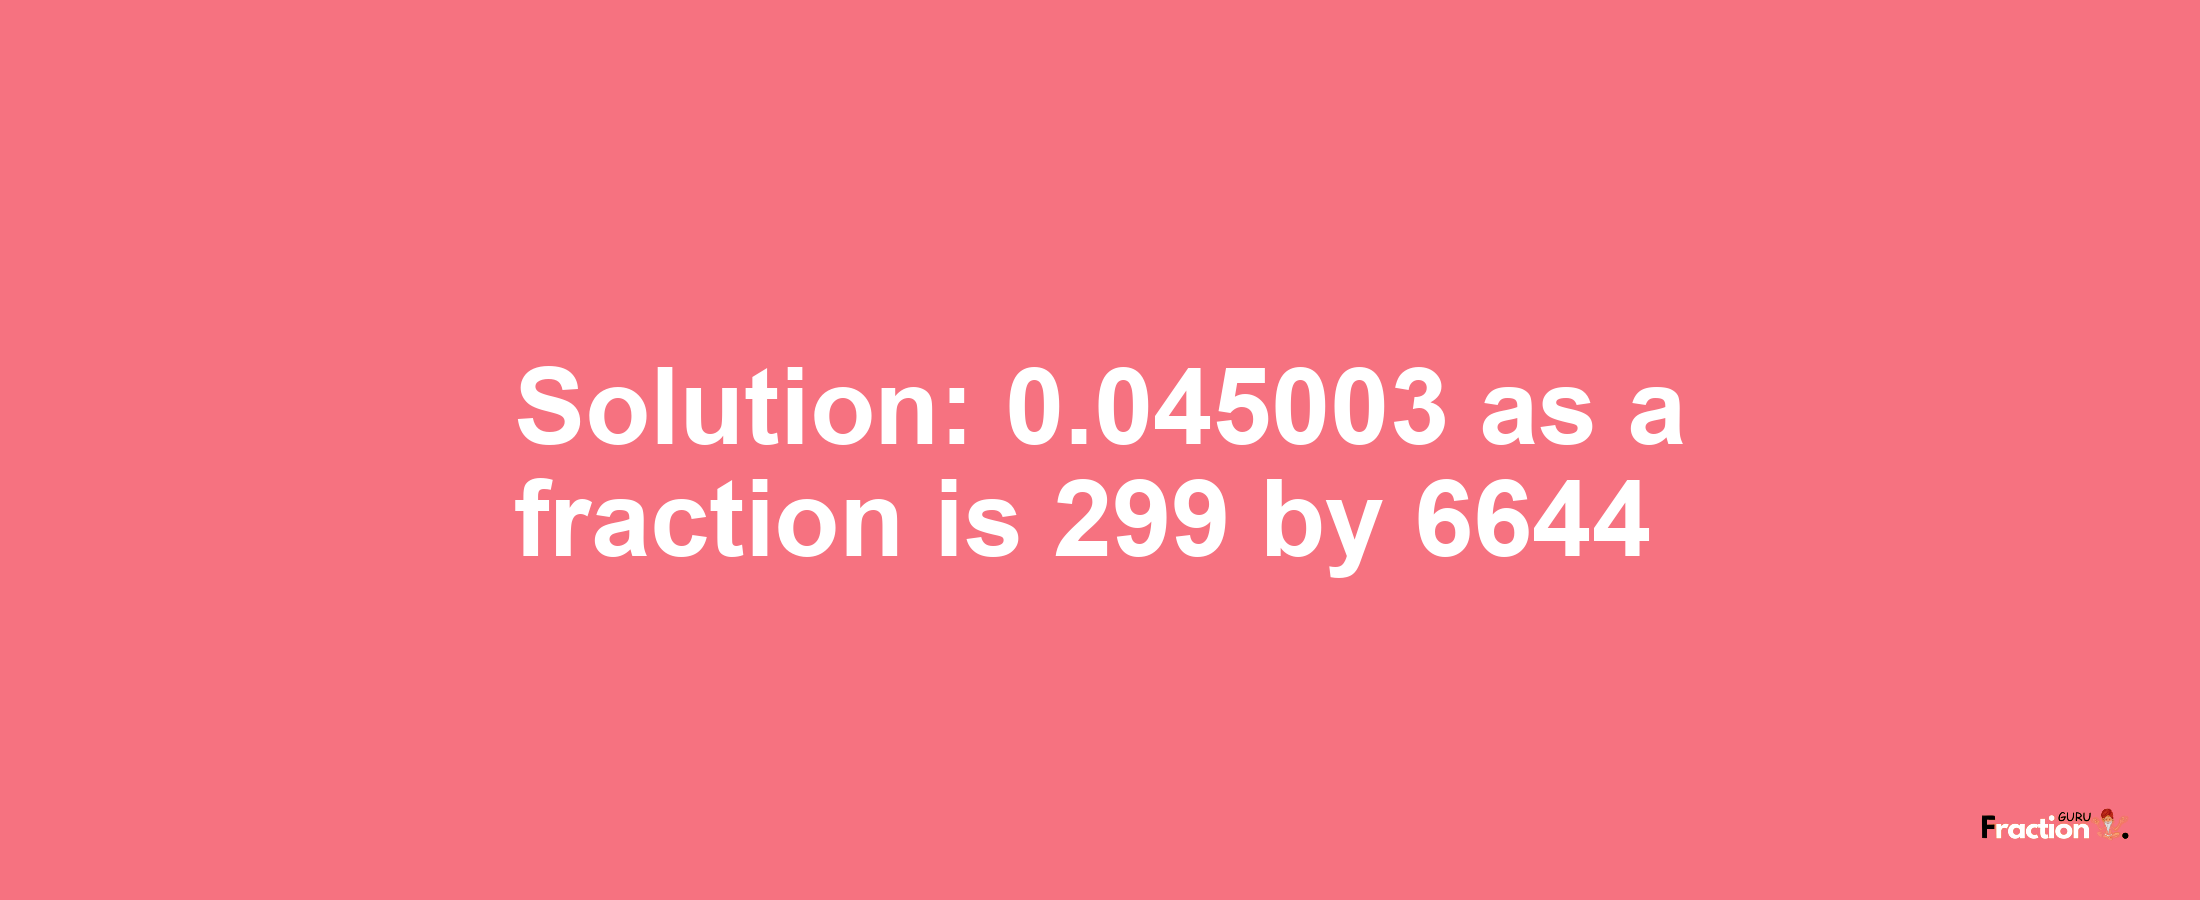 Solution:0.045003 as a fraction is 299/6644